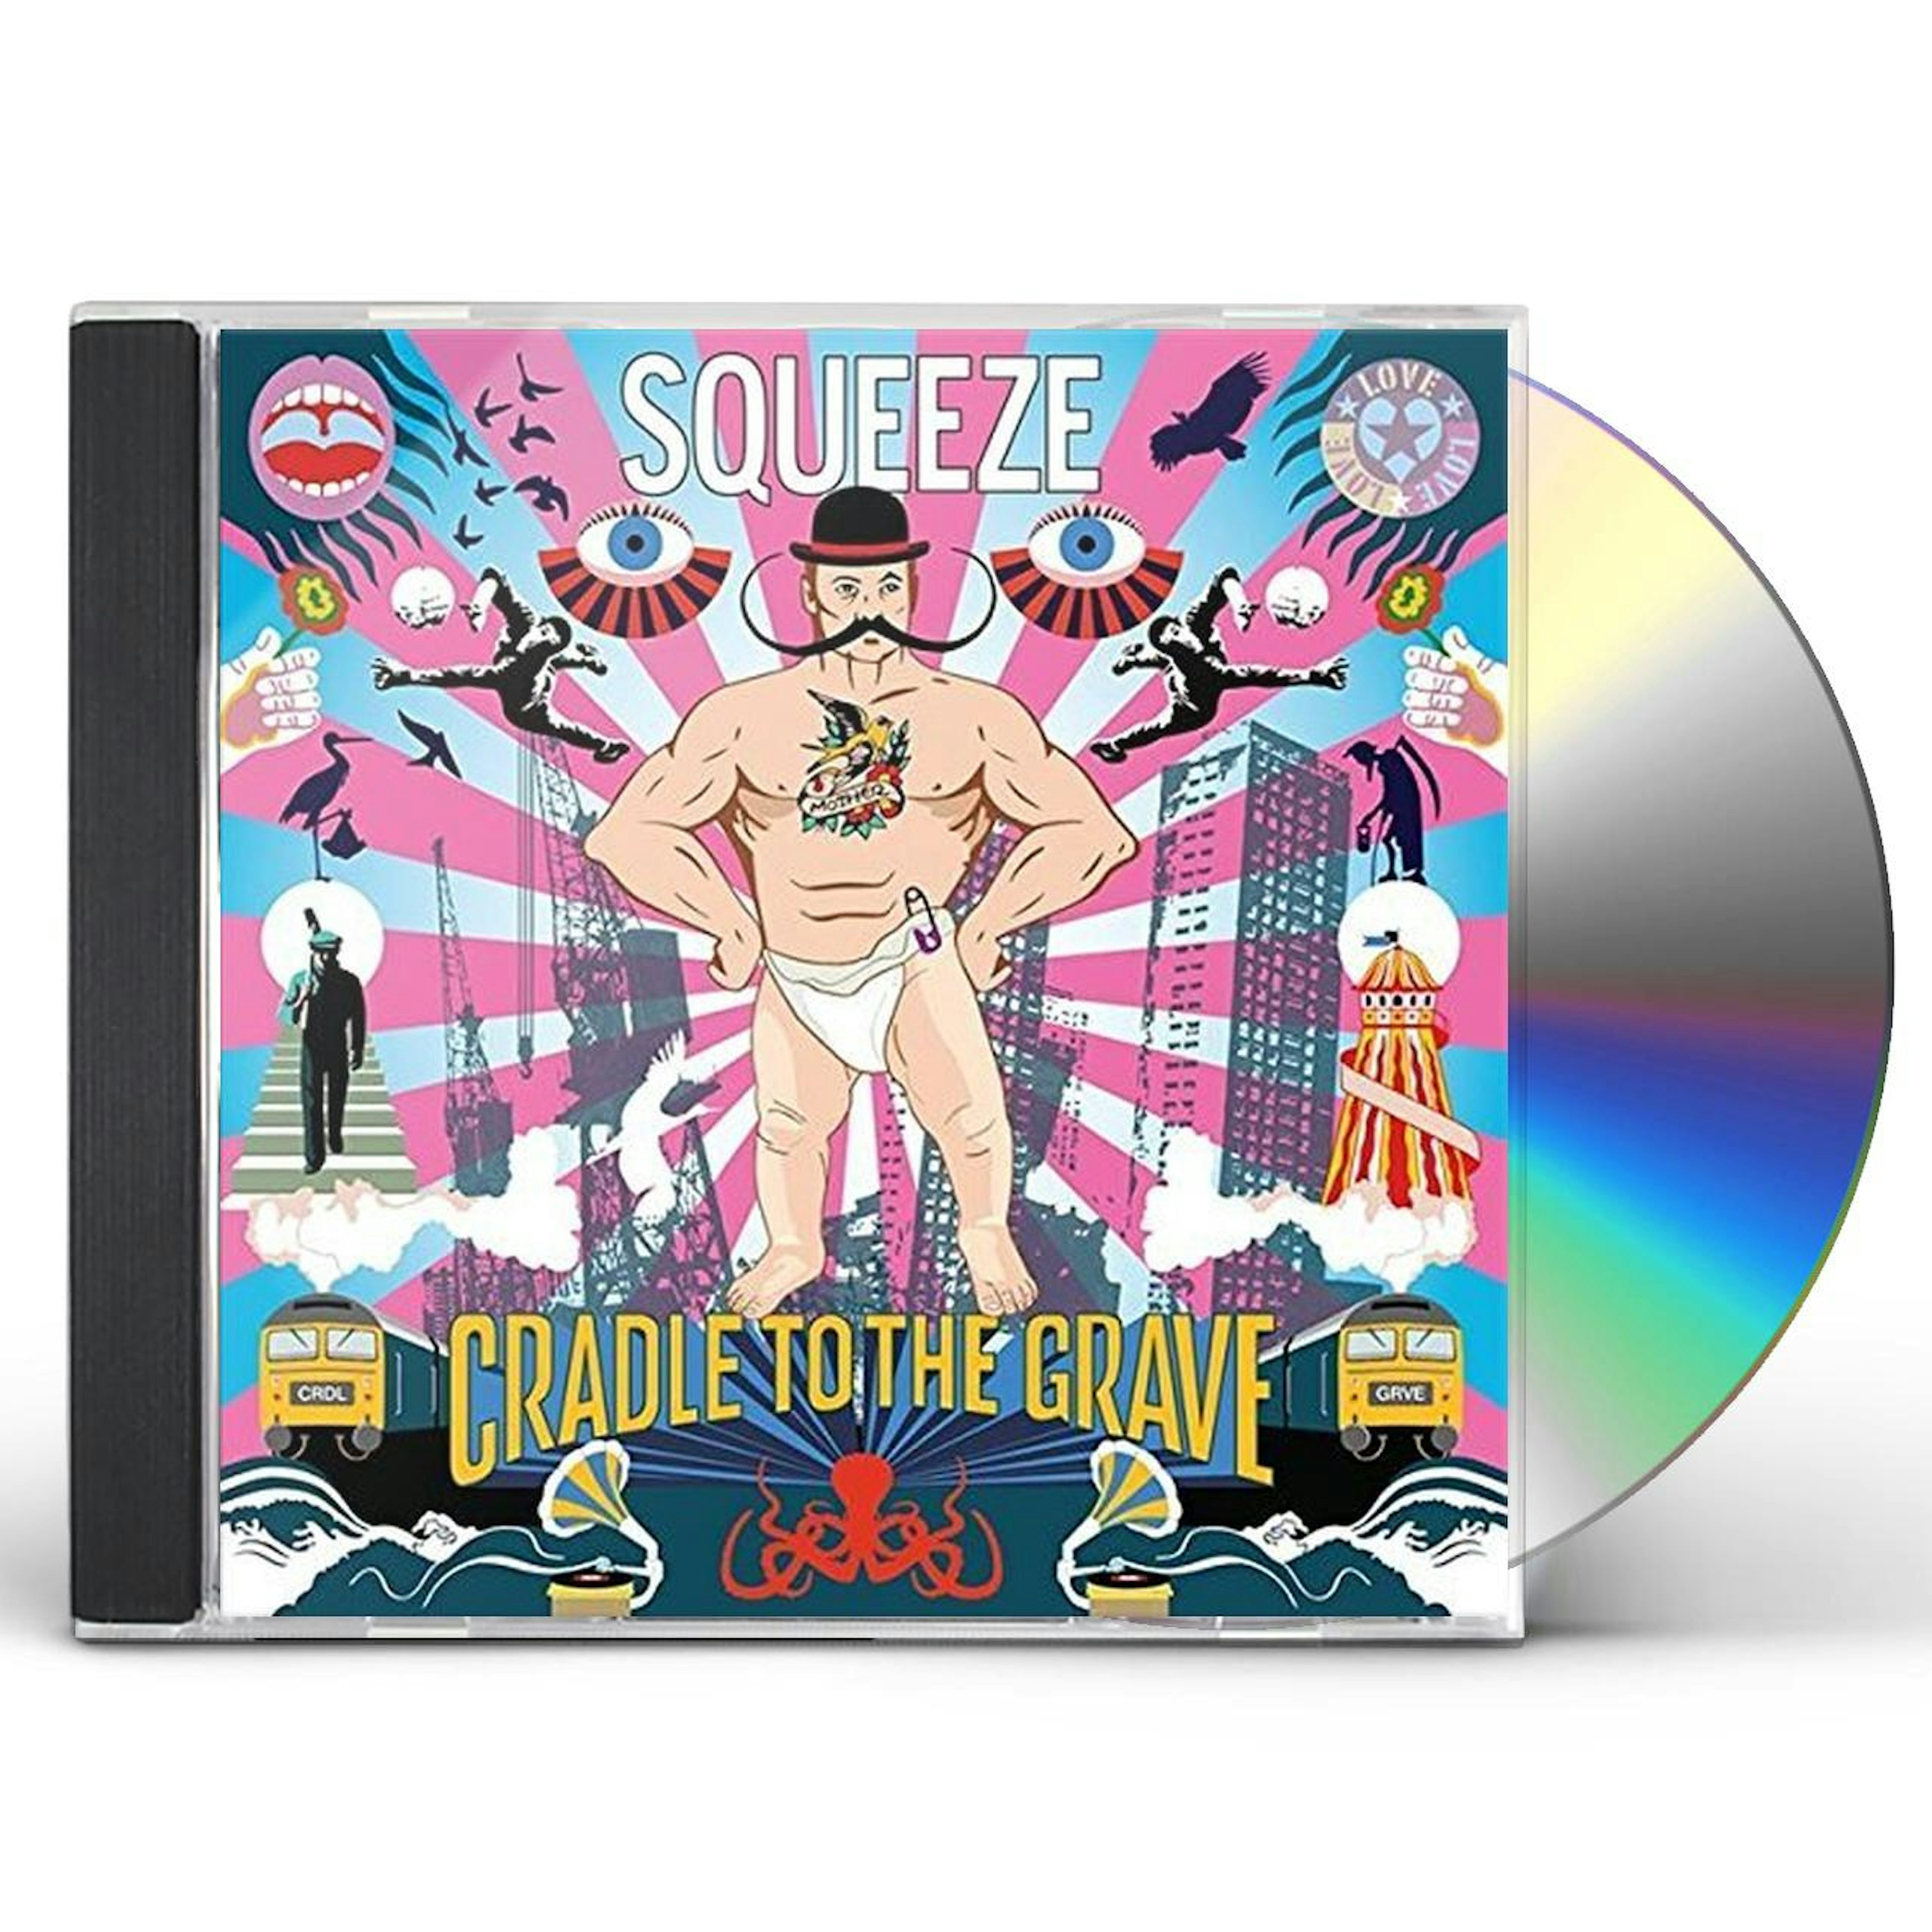 Squeeze Cradle To The Grave Cd